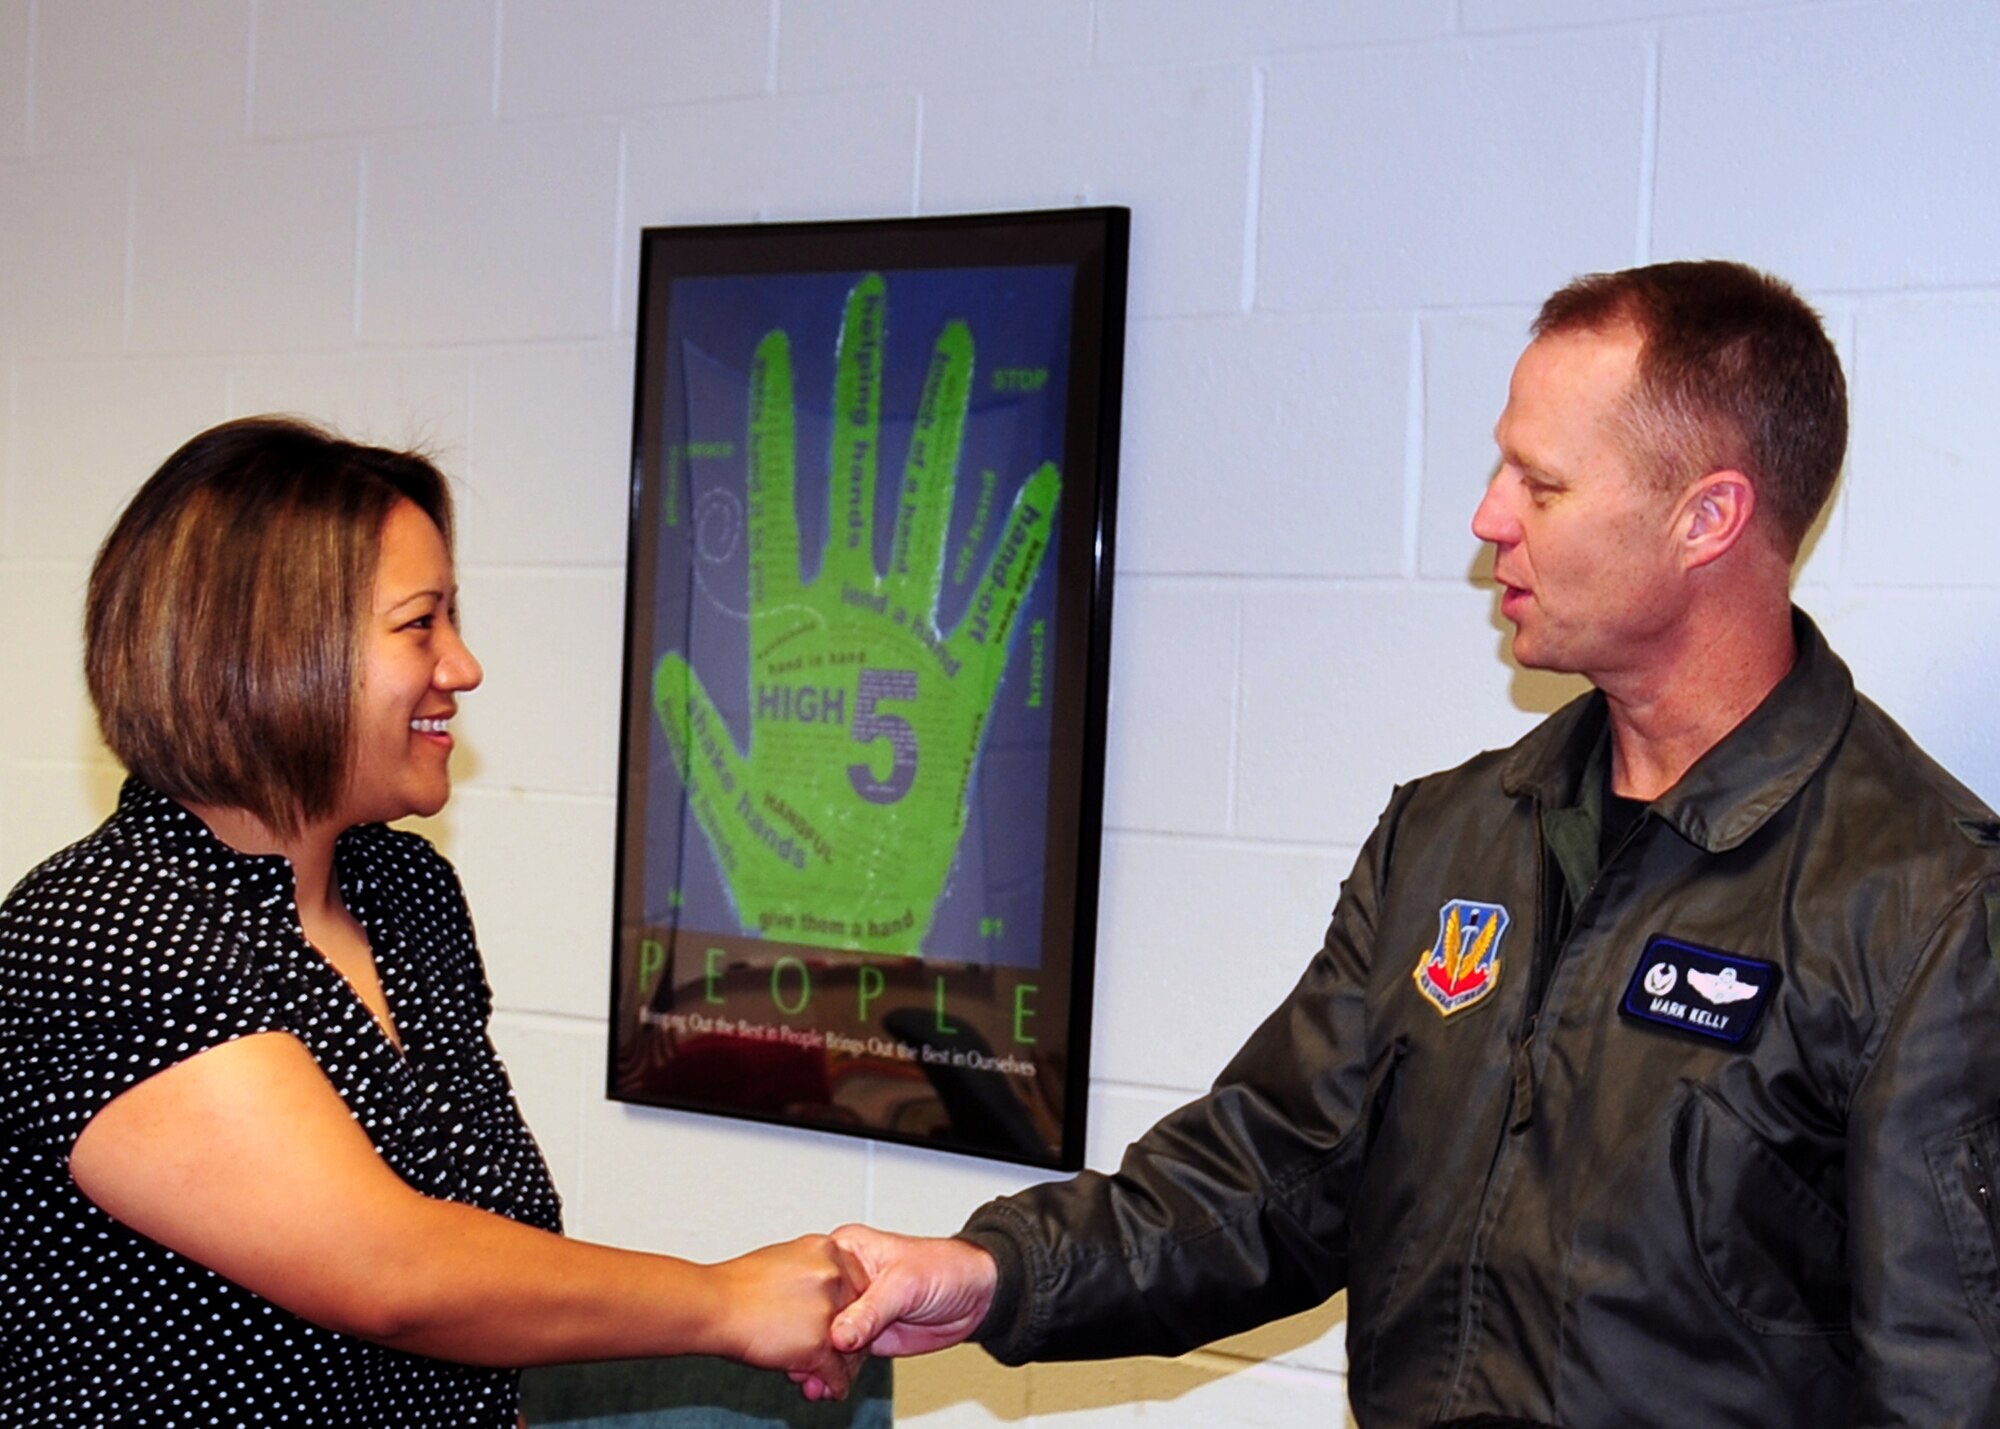 Col. Mark Kelly, 4th Fighter Wing commander, presents Natasha Fukushima, after-school care provider, with a commander's coin for her work as an educator at Seymour Johnson Air Force Base, N.C., March 17, 2009. Ms. Fukushima was selected as an Air Force top-five nominee for the School-Age NOTES Foundation's Quest for Excellence Award. The NOTES foundation is a publishing and retailing company that provides resources for after-school programs. (U.S. Air Force photo by Airman 1st Class Rae Perry) 